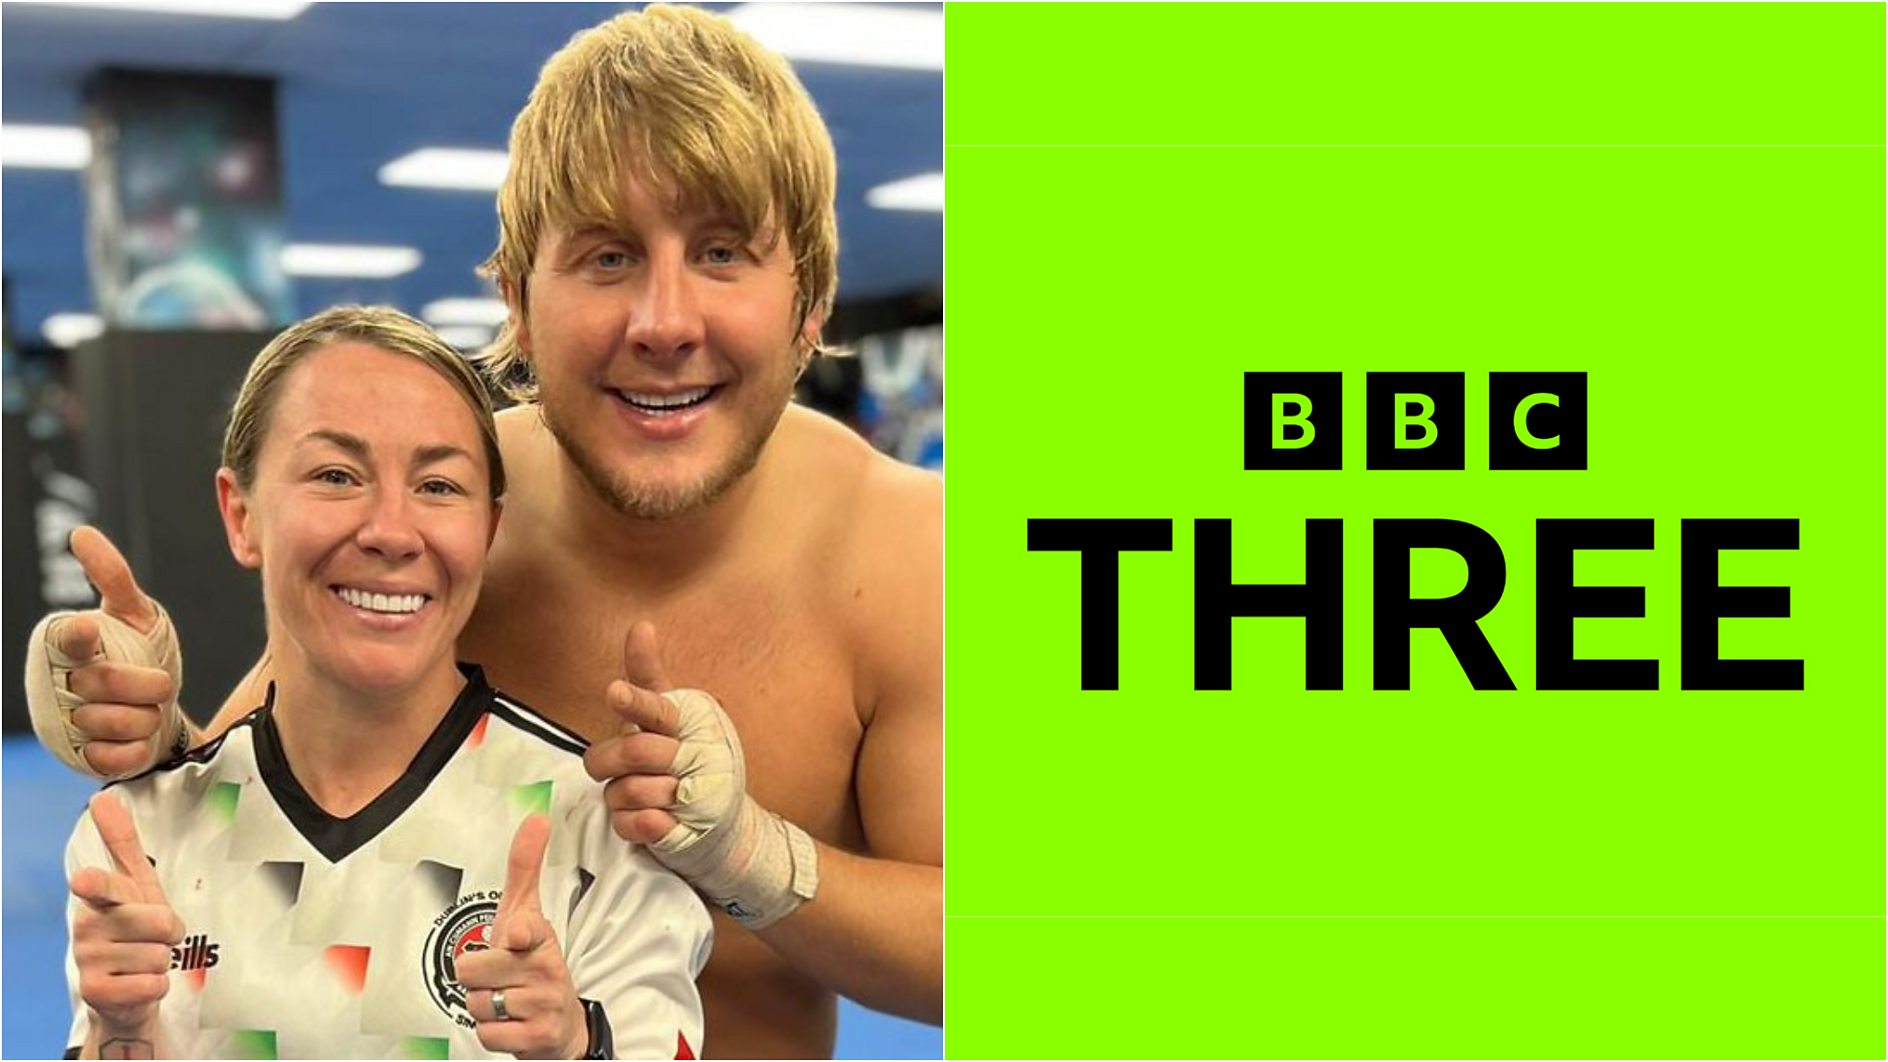 New reality series following the lives of Paddy ‘The Baddy’ Pimblett and Molly ‘Meatball’ McCann